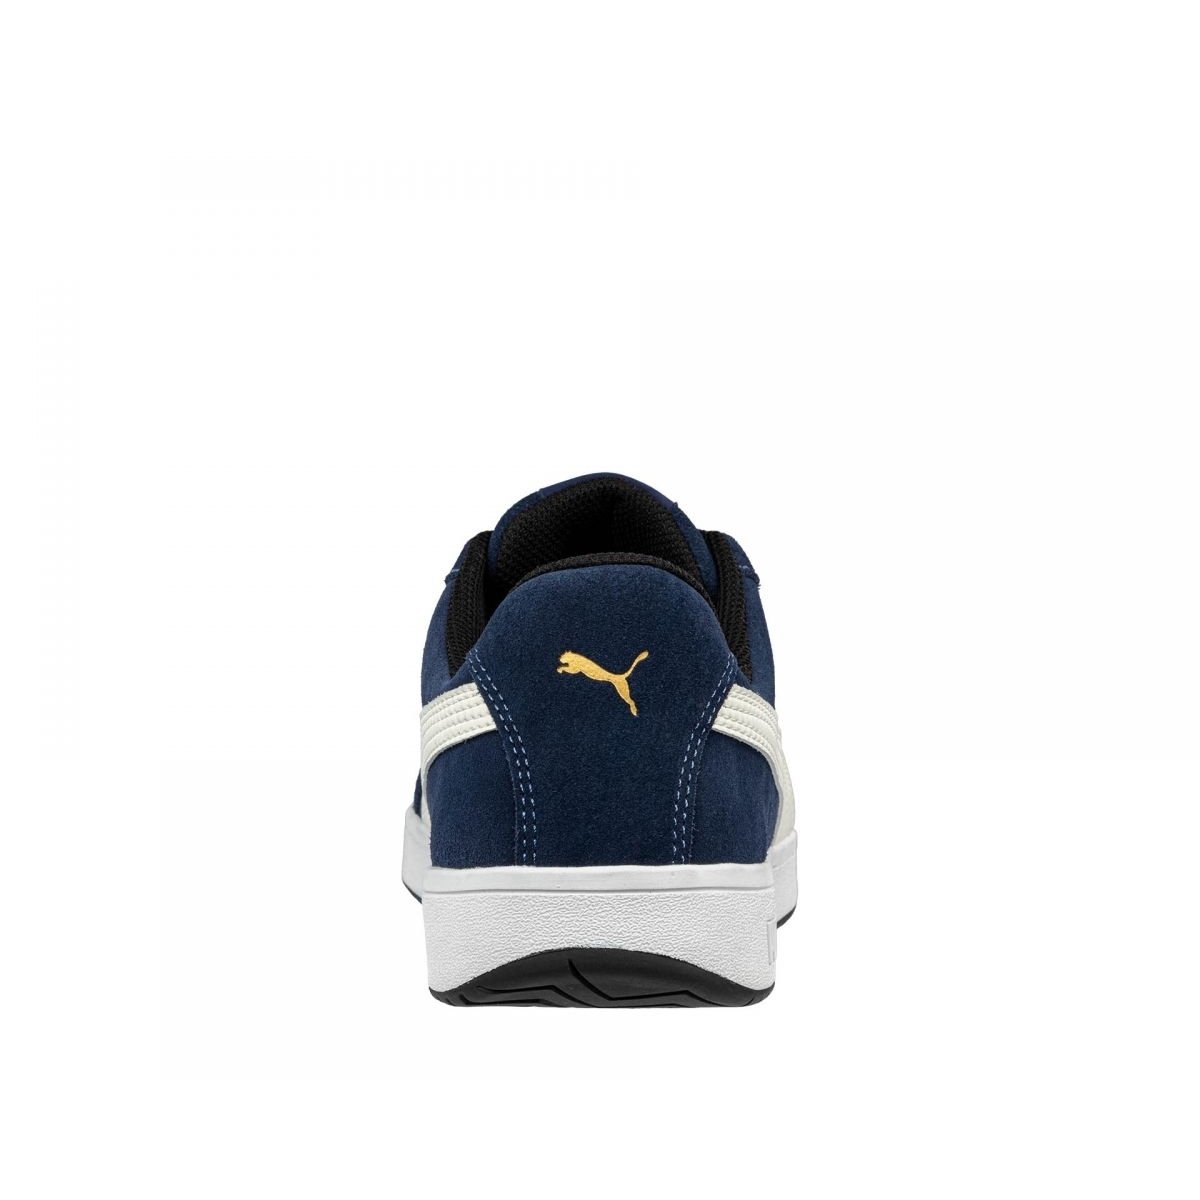 PUMA Safety Men's Iconic Low Composite Toe EH Work Shoes Navy Suede - 640025 ONE SIZE Navy - Navy, 13